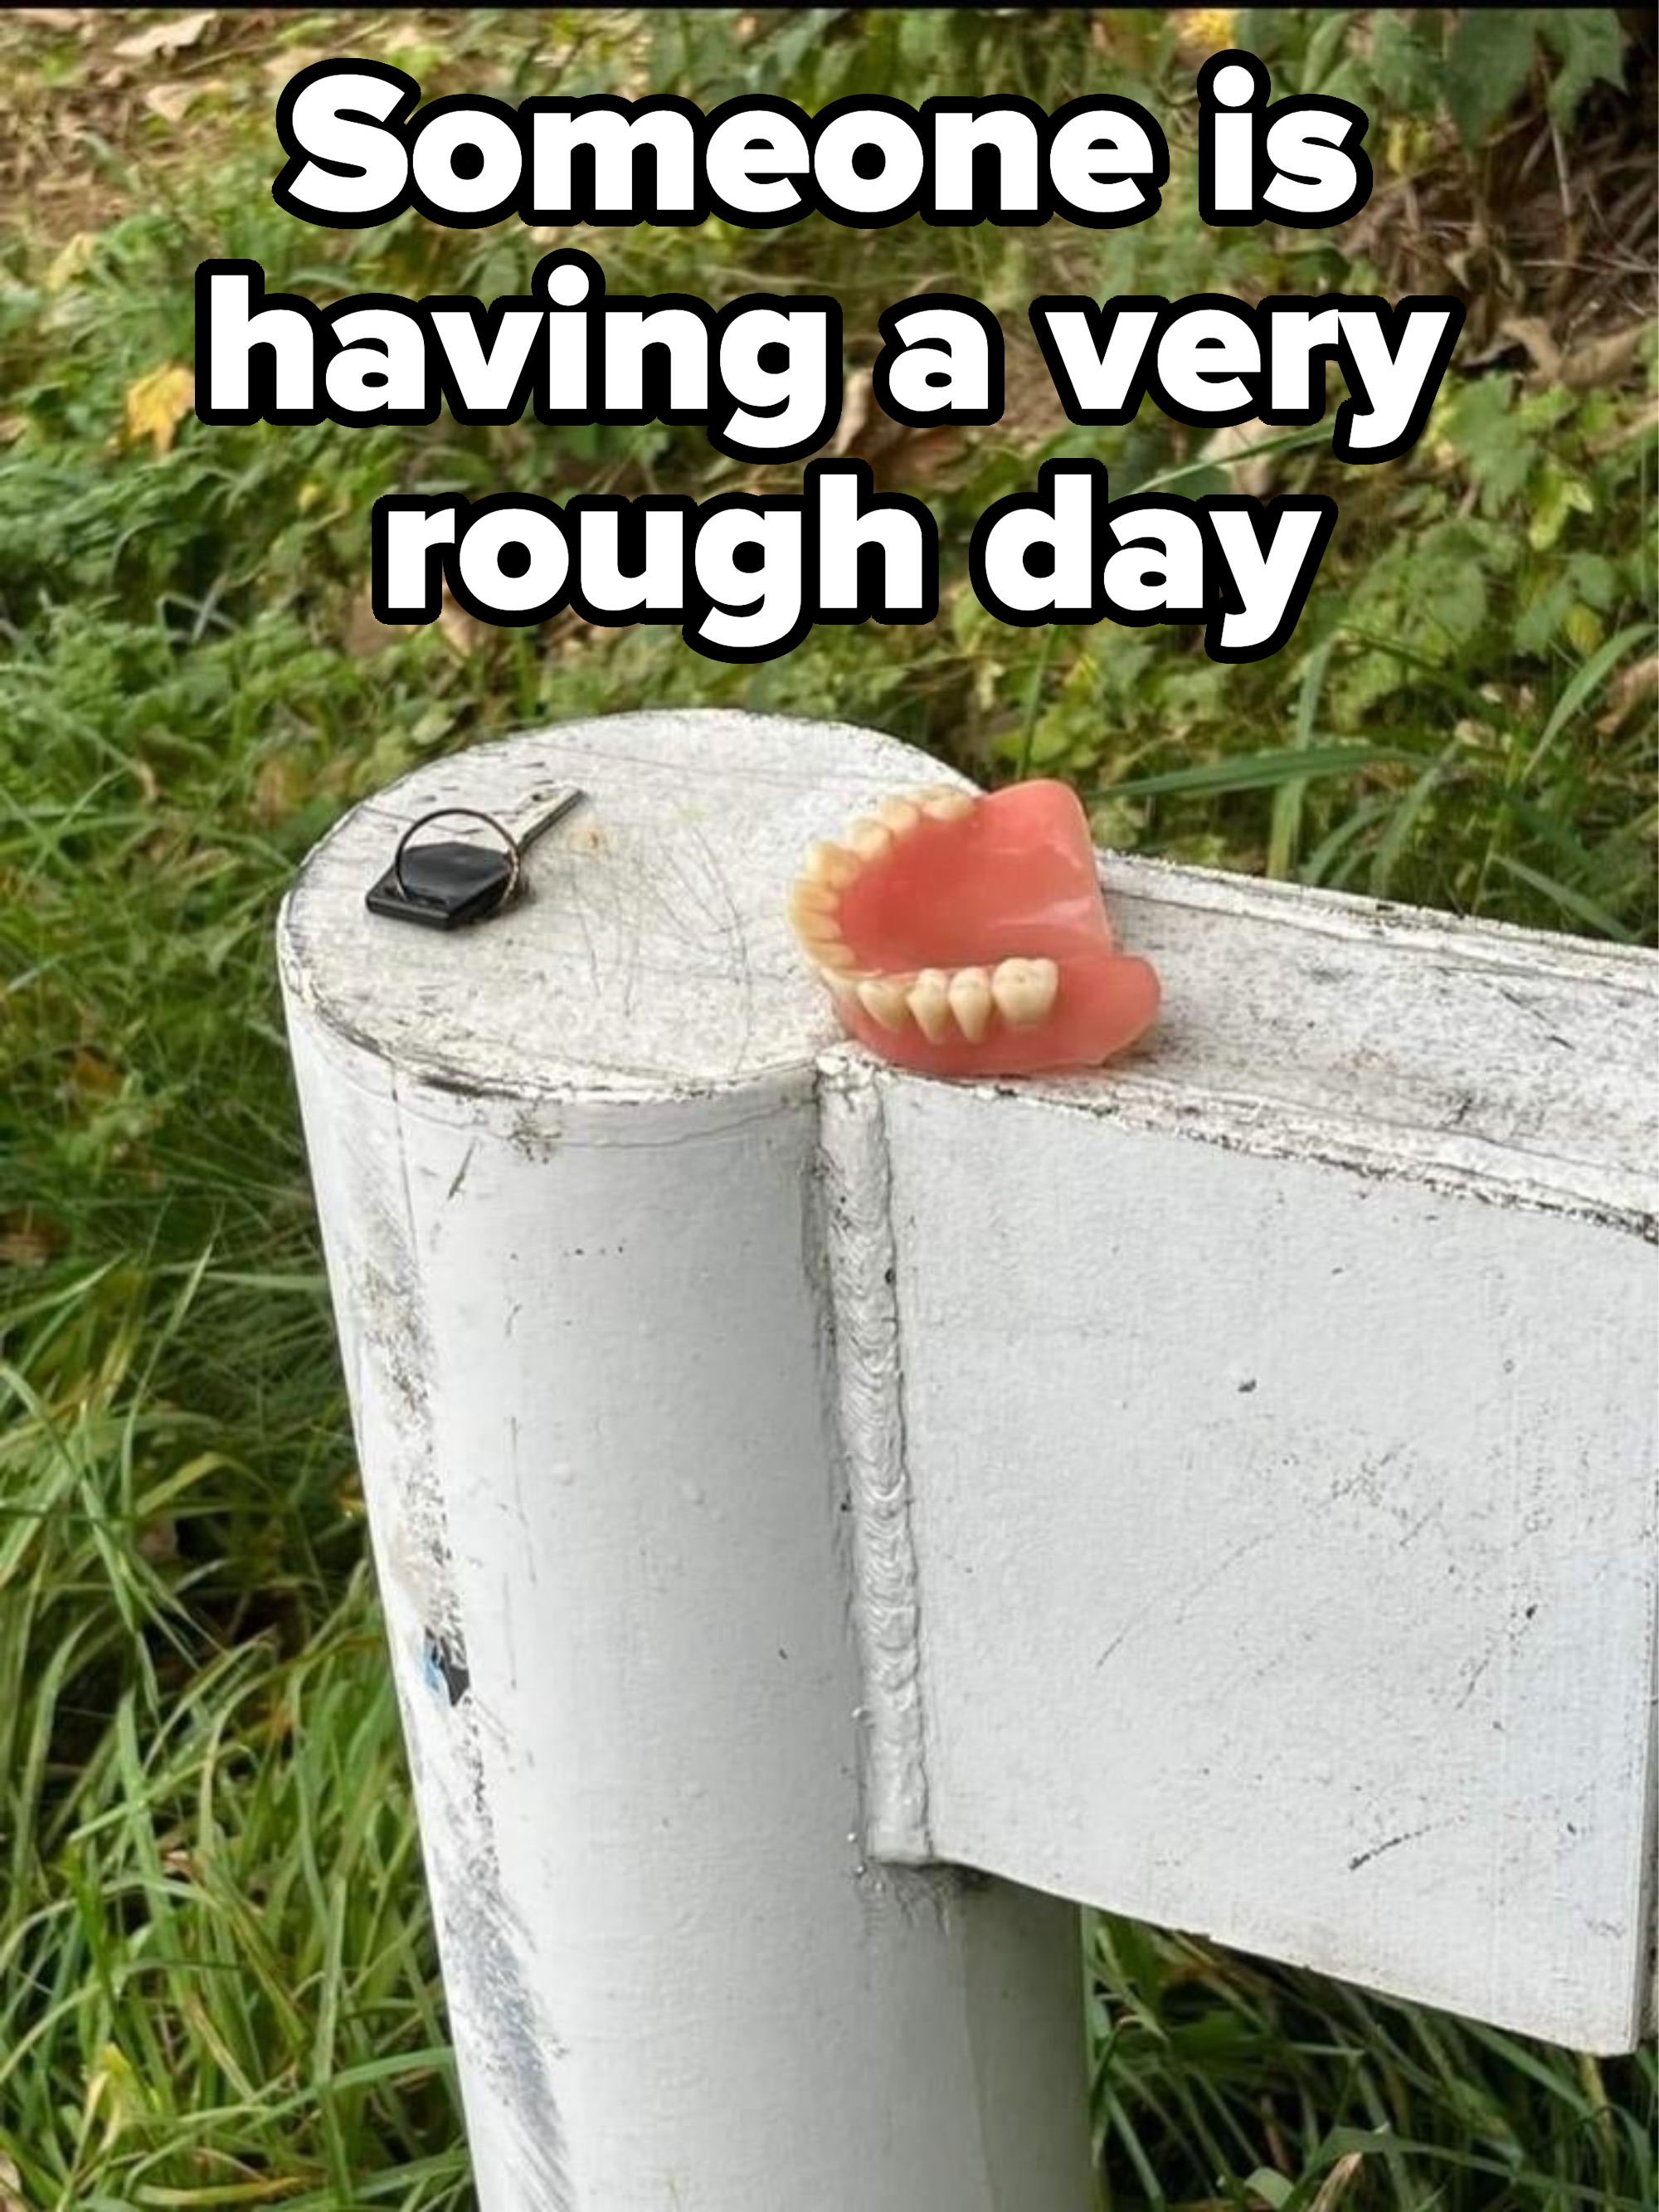 &quot;Someone is having a very rough day,&quot; with a set of false teeth and a car key on a pole in the grass